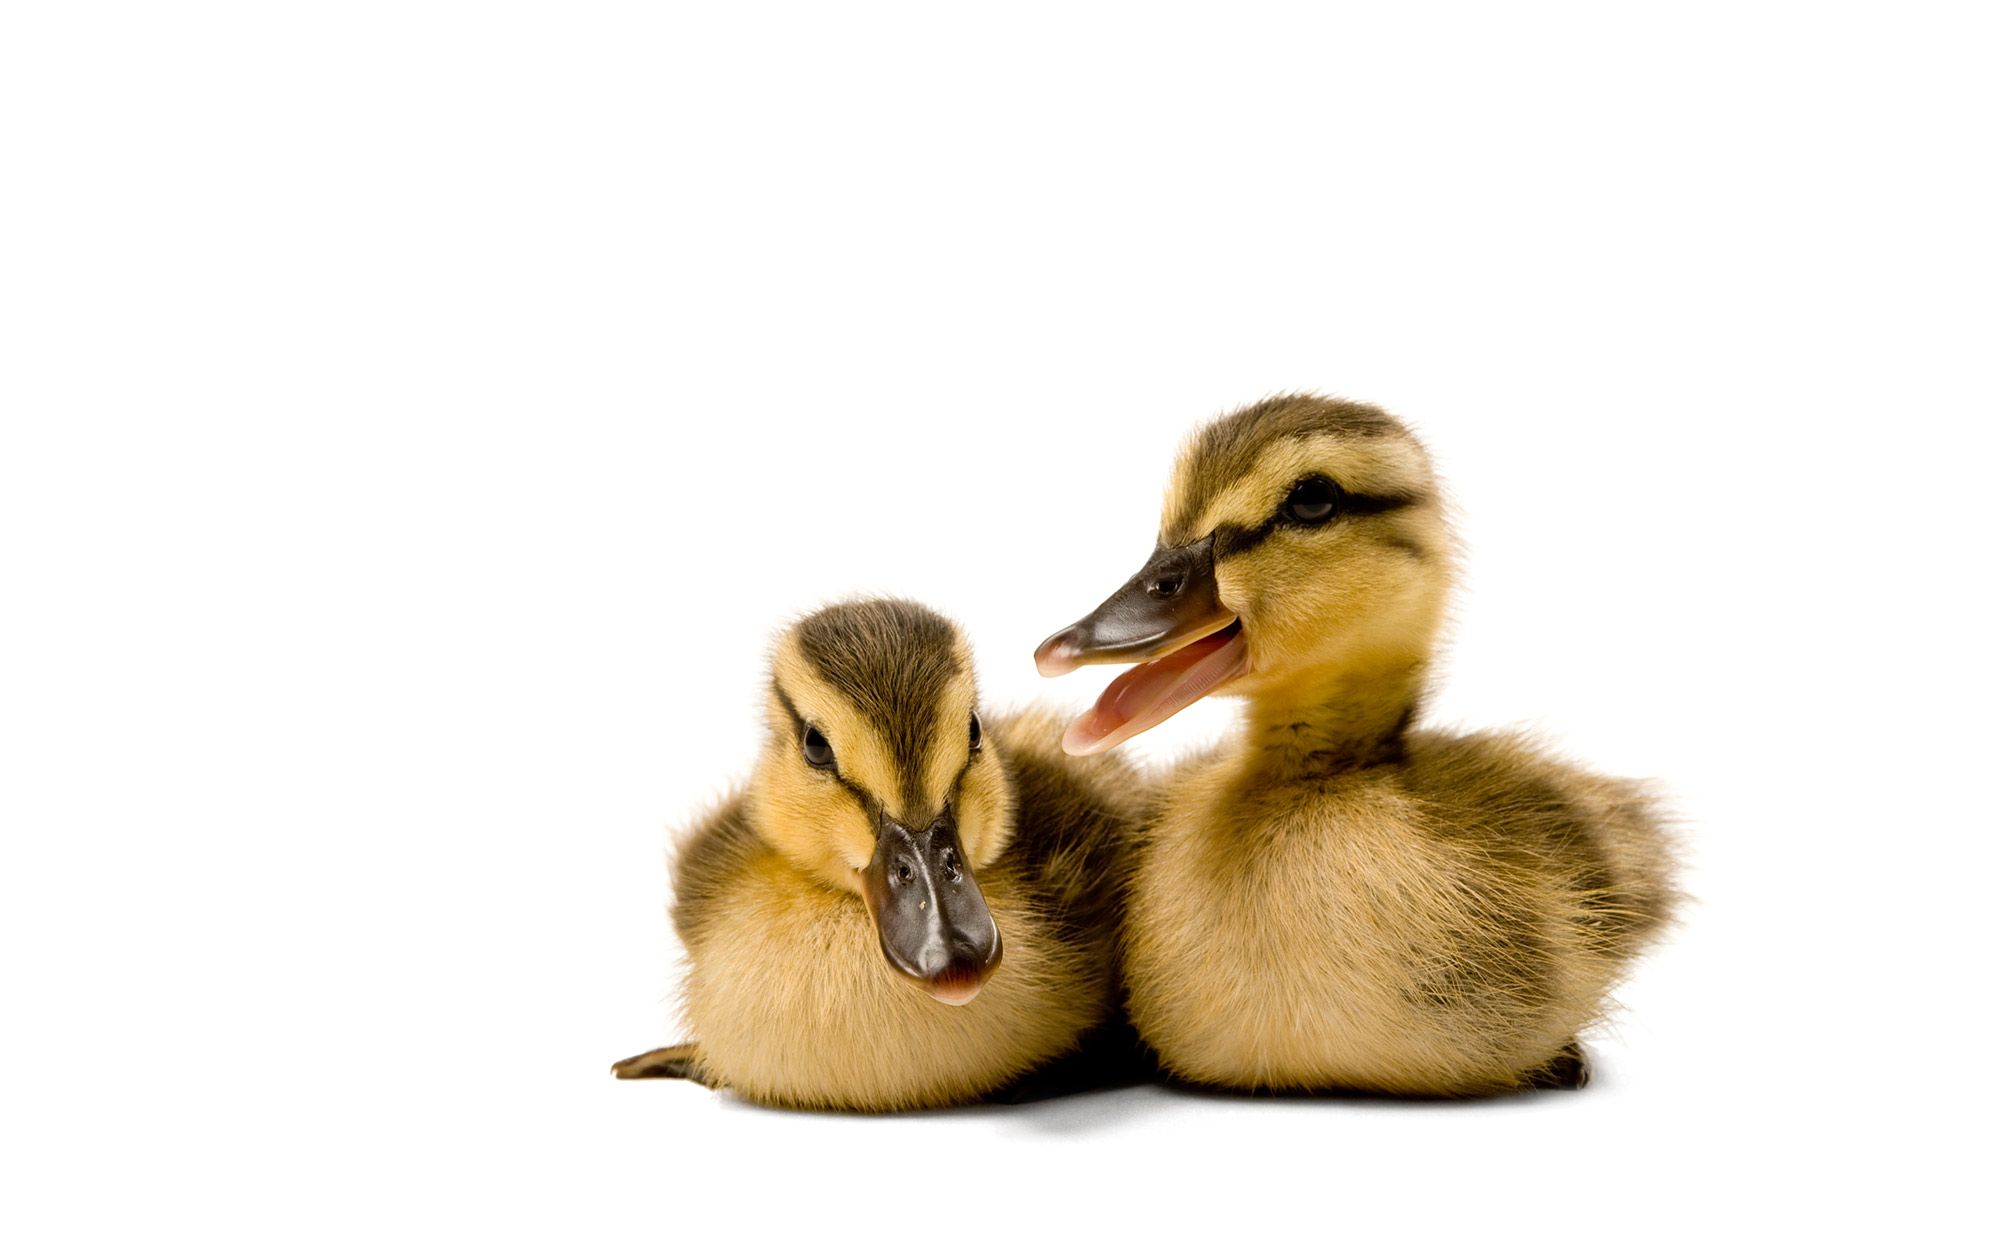 Discover The Surprising Meaning Of 'Duck Off' - You Won't Believe It!